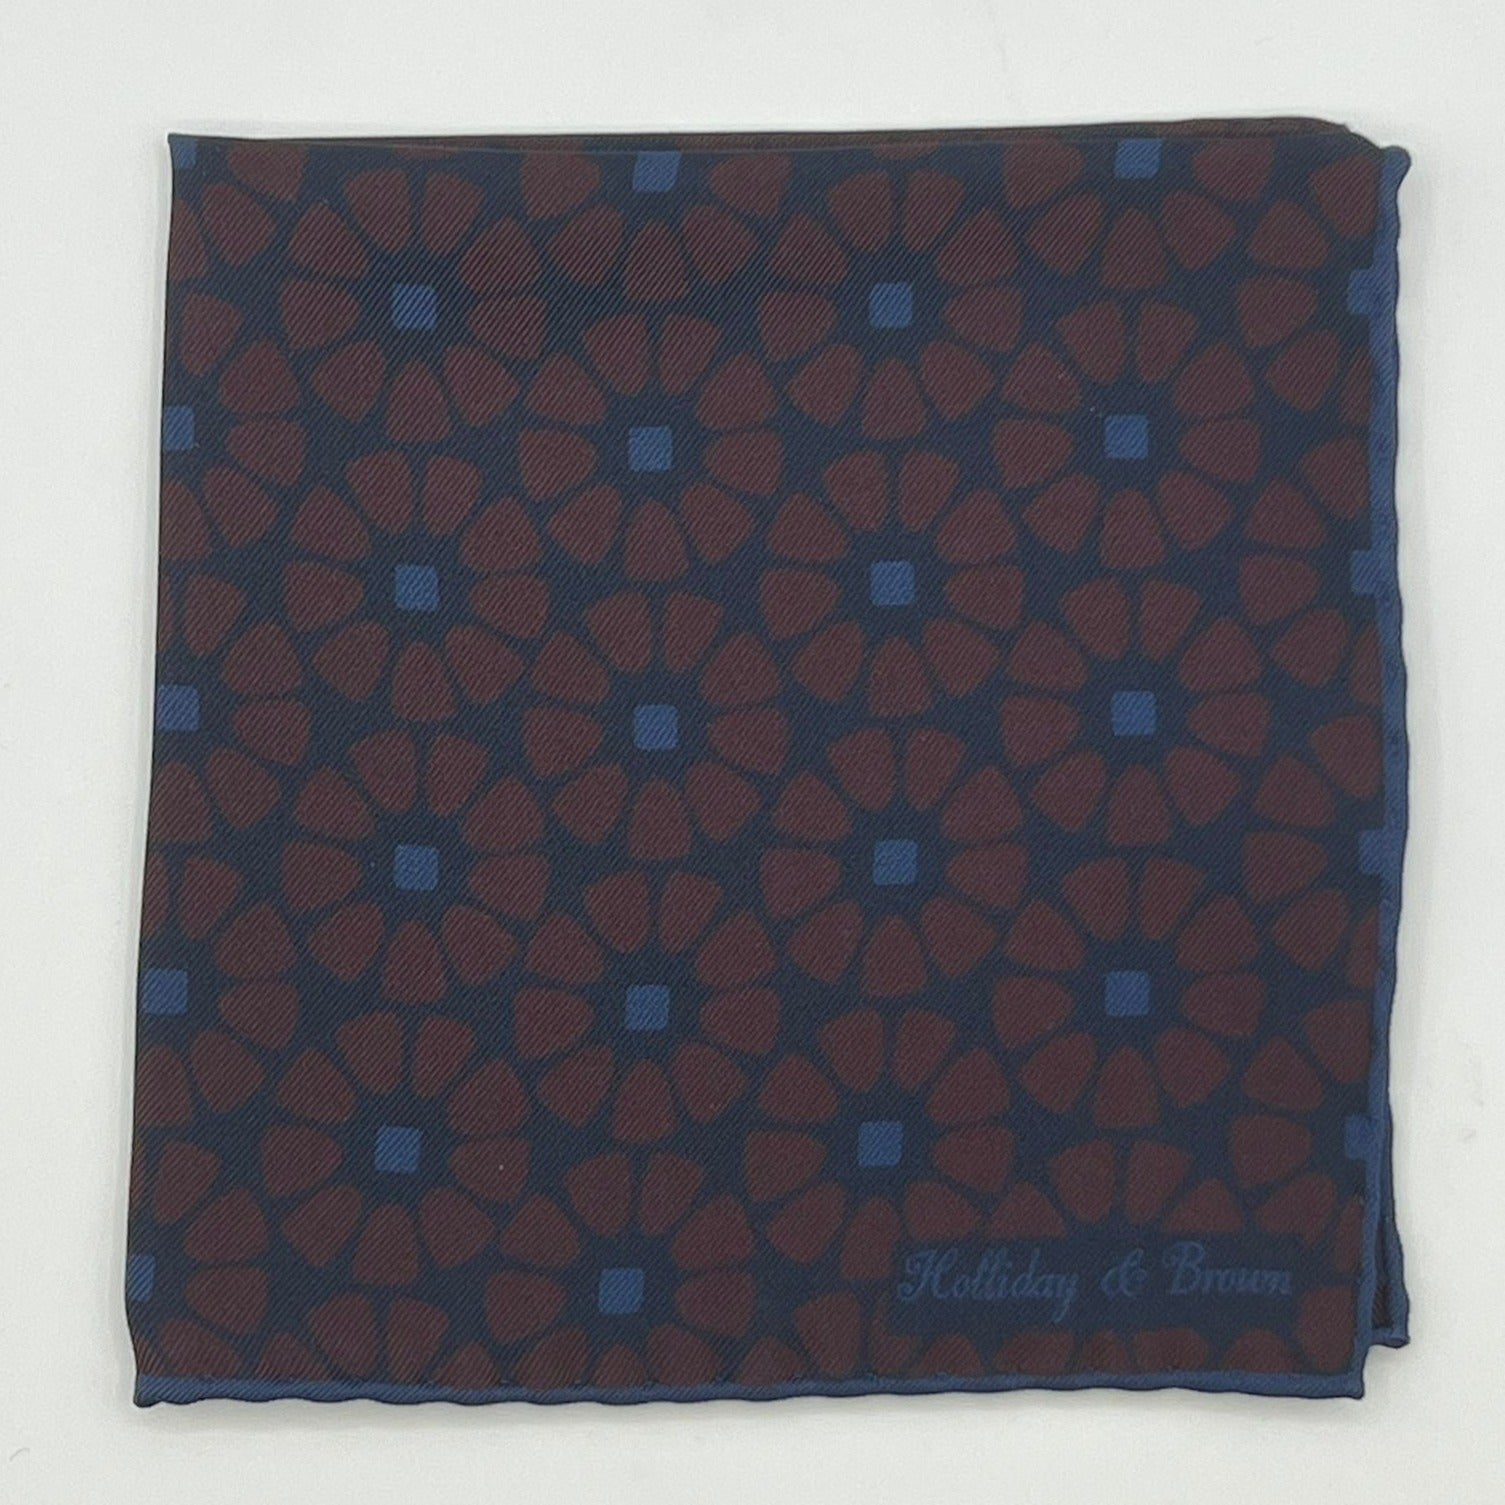 Holliday & Brown Hand-rolled   Holliday & Brown for Cruciani & Bella 100% Silk Red Wine and Blue Double Faces Patterned  Motif  Pocket Square Handmade in Italy 32 cm X 32 cm